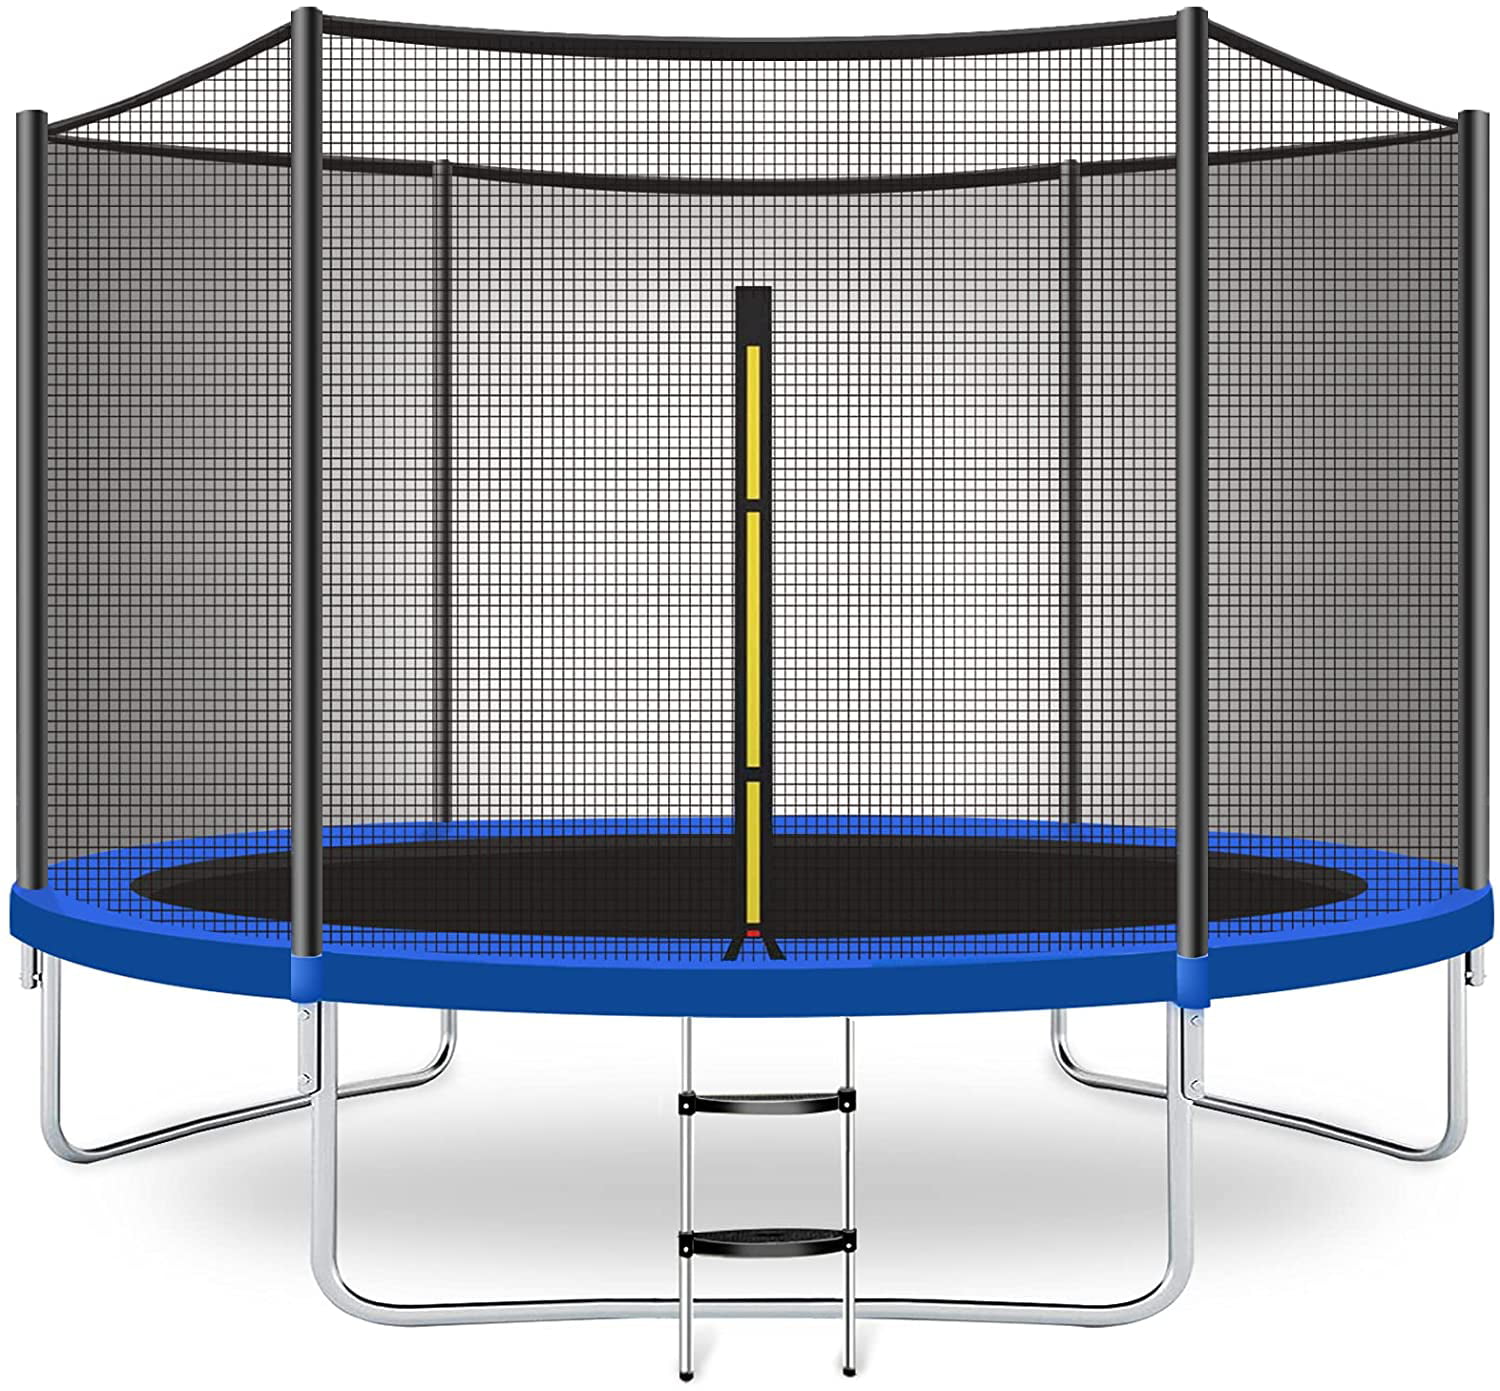 CalmMax Trampoline 10FT Jump Recreational Trampolines with Enclosure ...